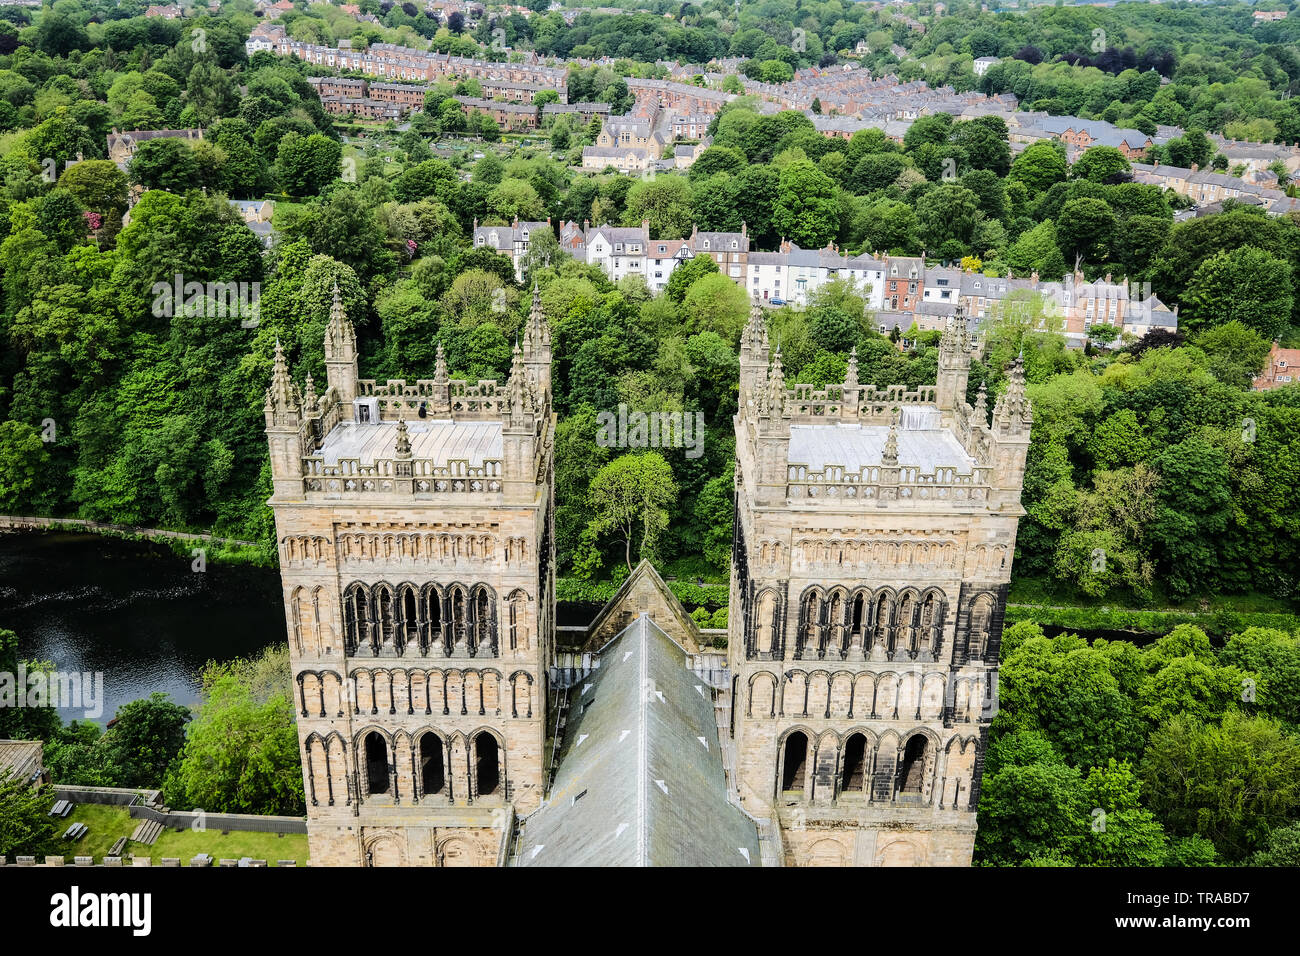 View from the top of the Central Tower at Durham Cathedral, England Stock Photo